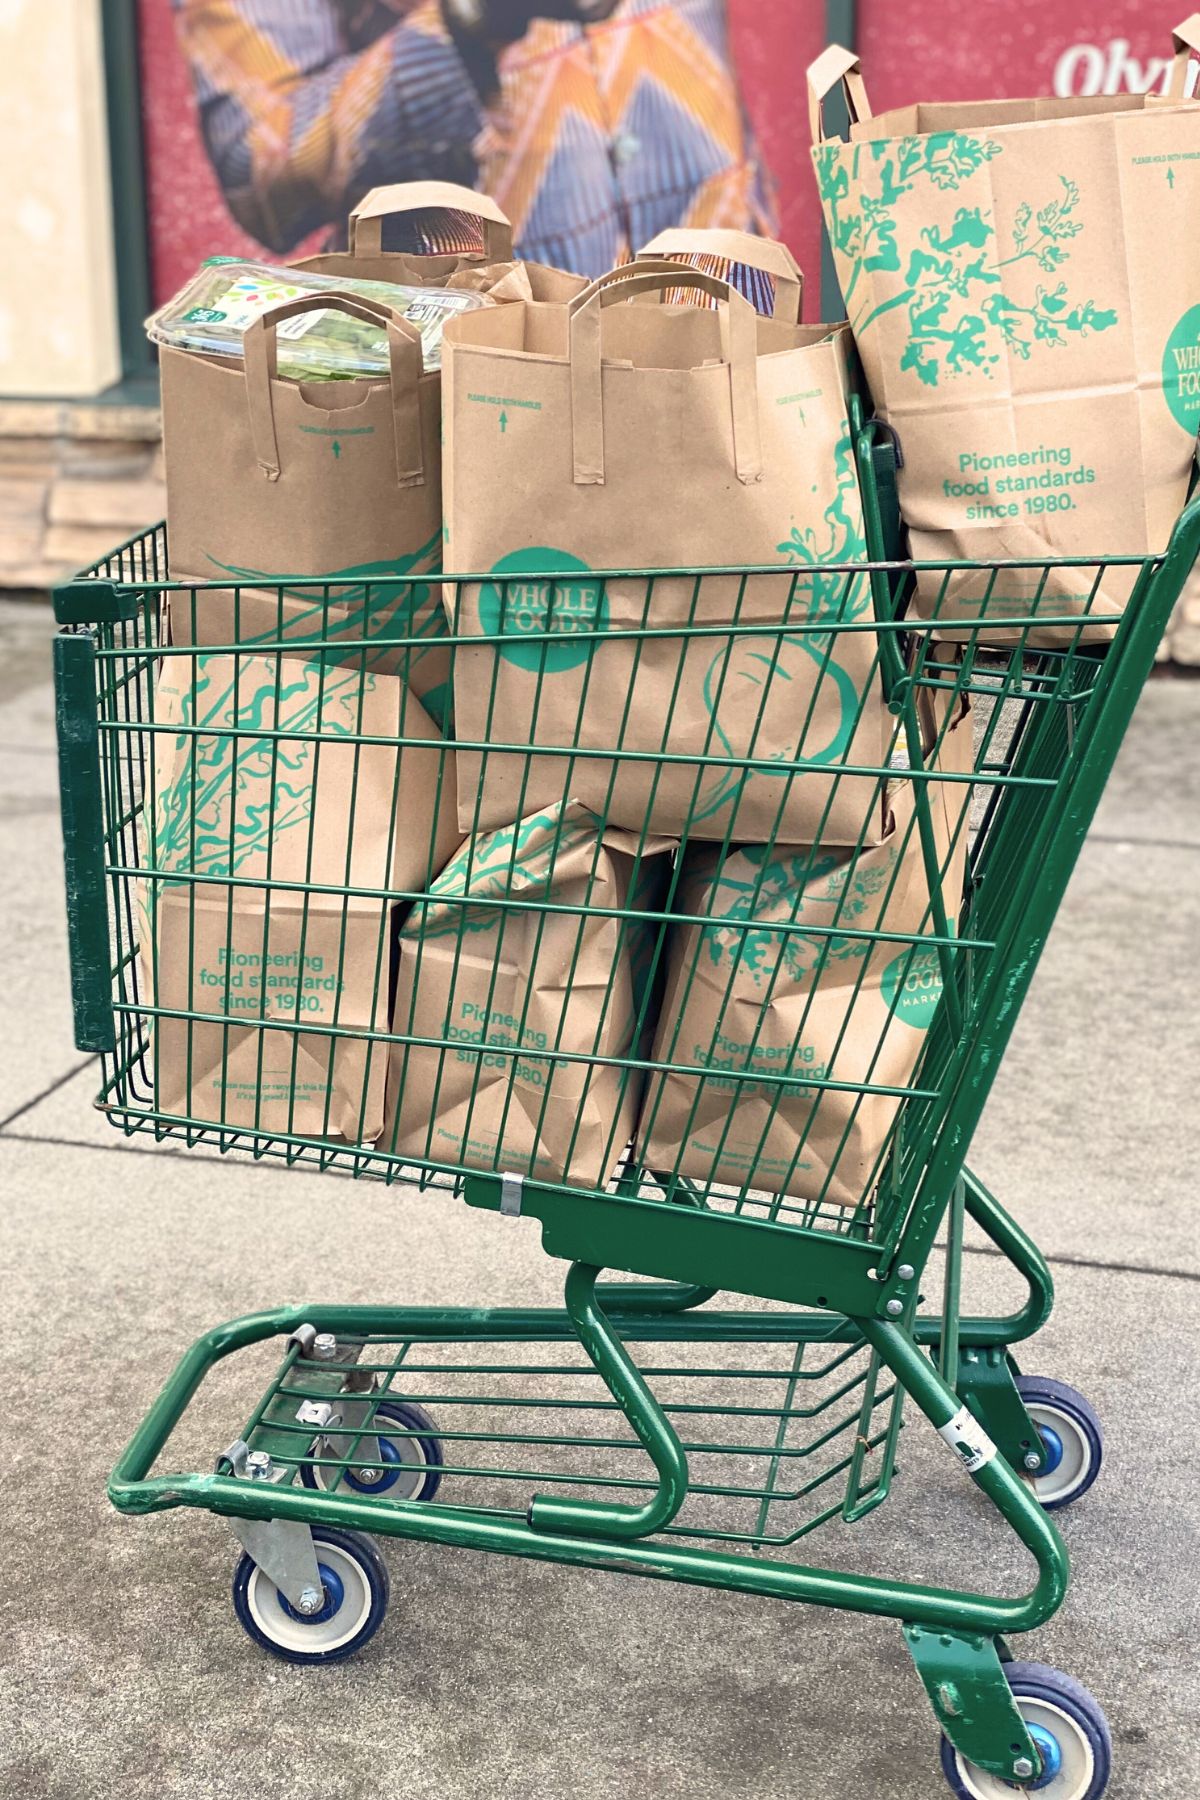 Bringing paper bags home from the store breeds clutter